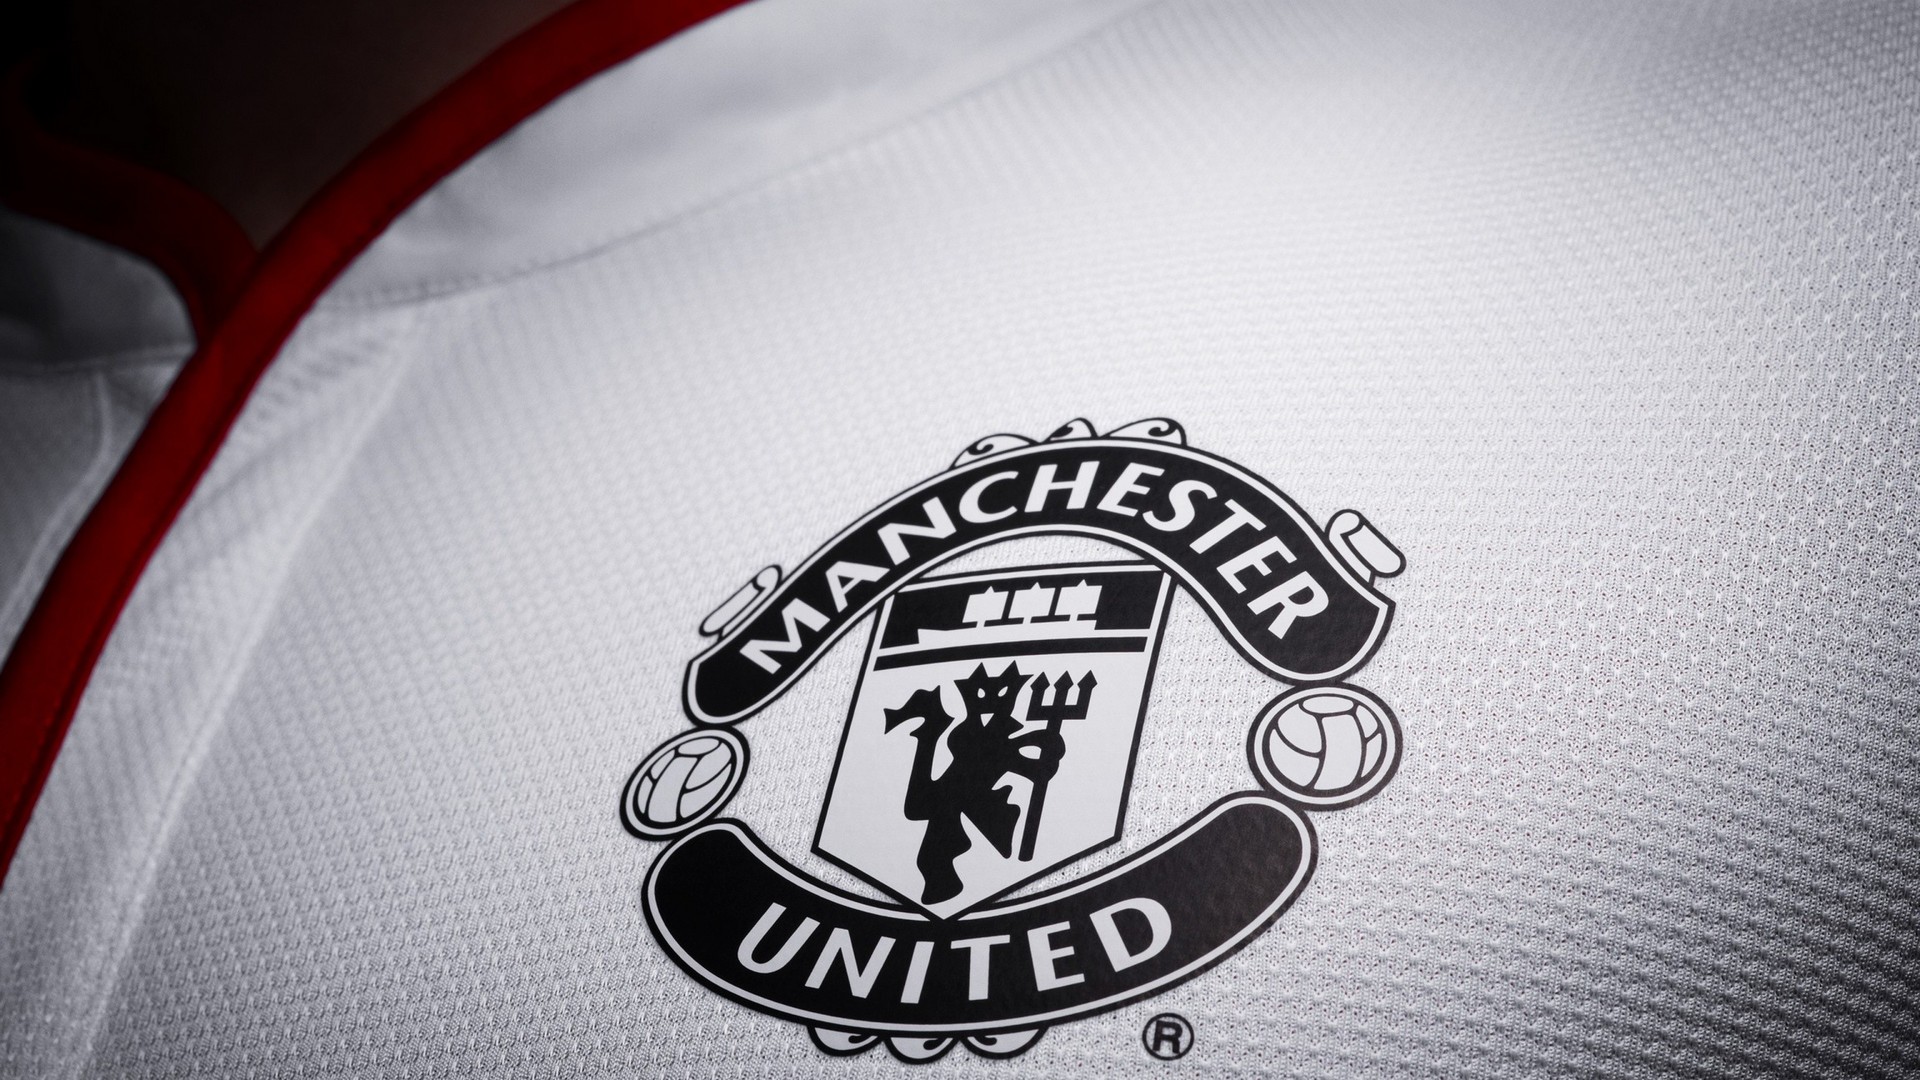 Manchester United For Mac Wallpaper with high-resolution 1920x1080 pixel. You can use this wallpaper for your Desktop Computers, Mac Screensavers, Windows Backgrounds, iPhone Wallpapers, Tablet or Android Lock screen and another Mobile device